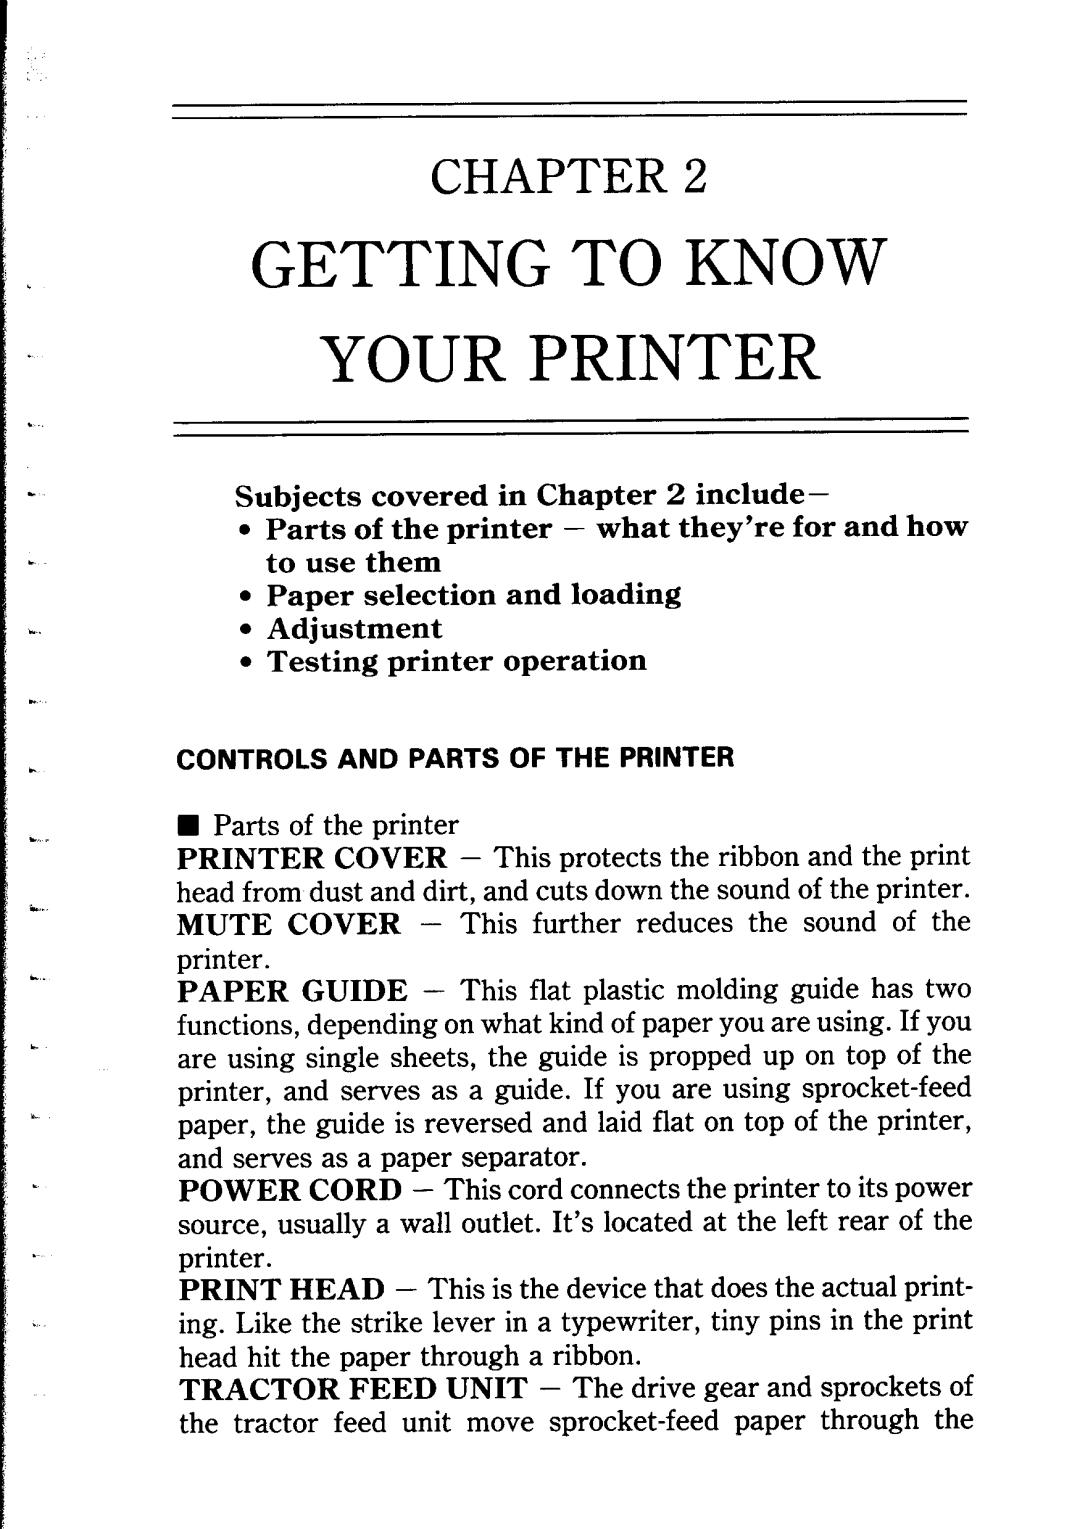 Star Micronics NB24-10/15 user manual Getting To Know Your Printer, Subjects covered in include, Chapter 